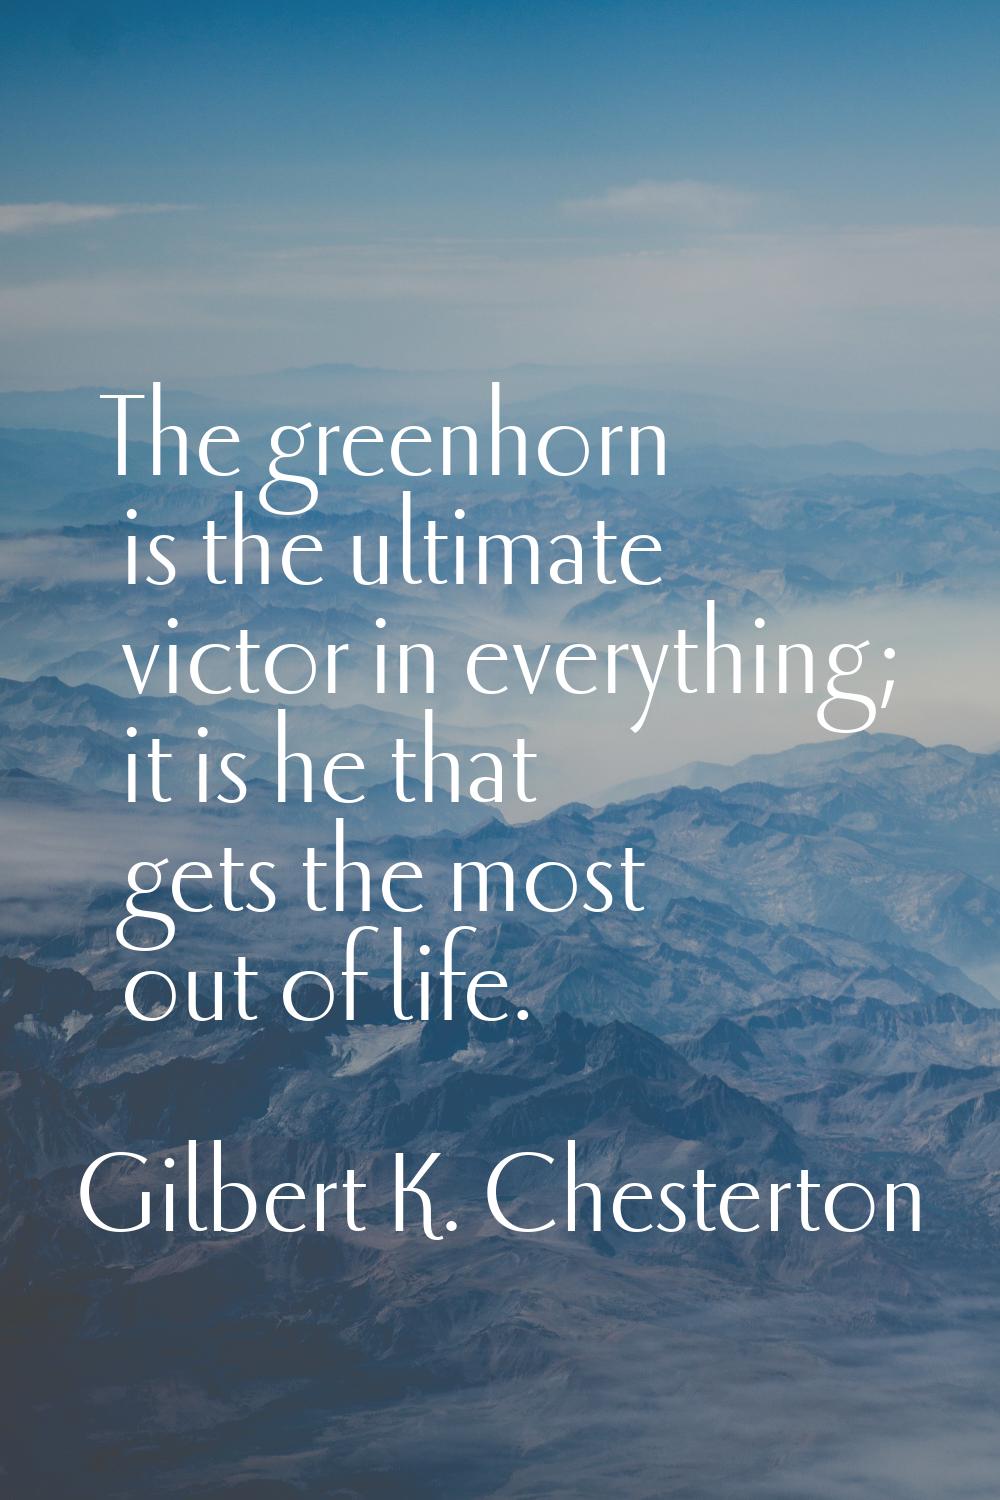 The greenhorn is the ultimate victor in everything; it is he that gets the most out of life.